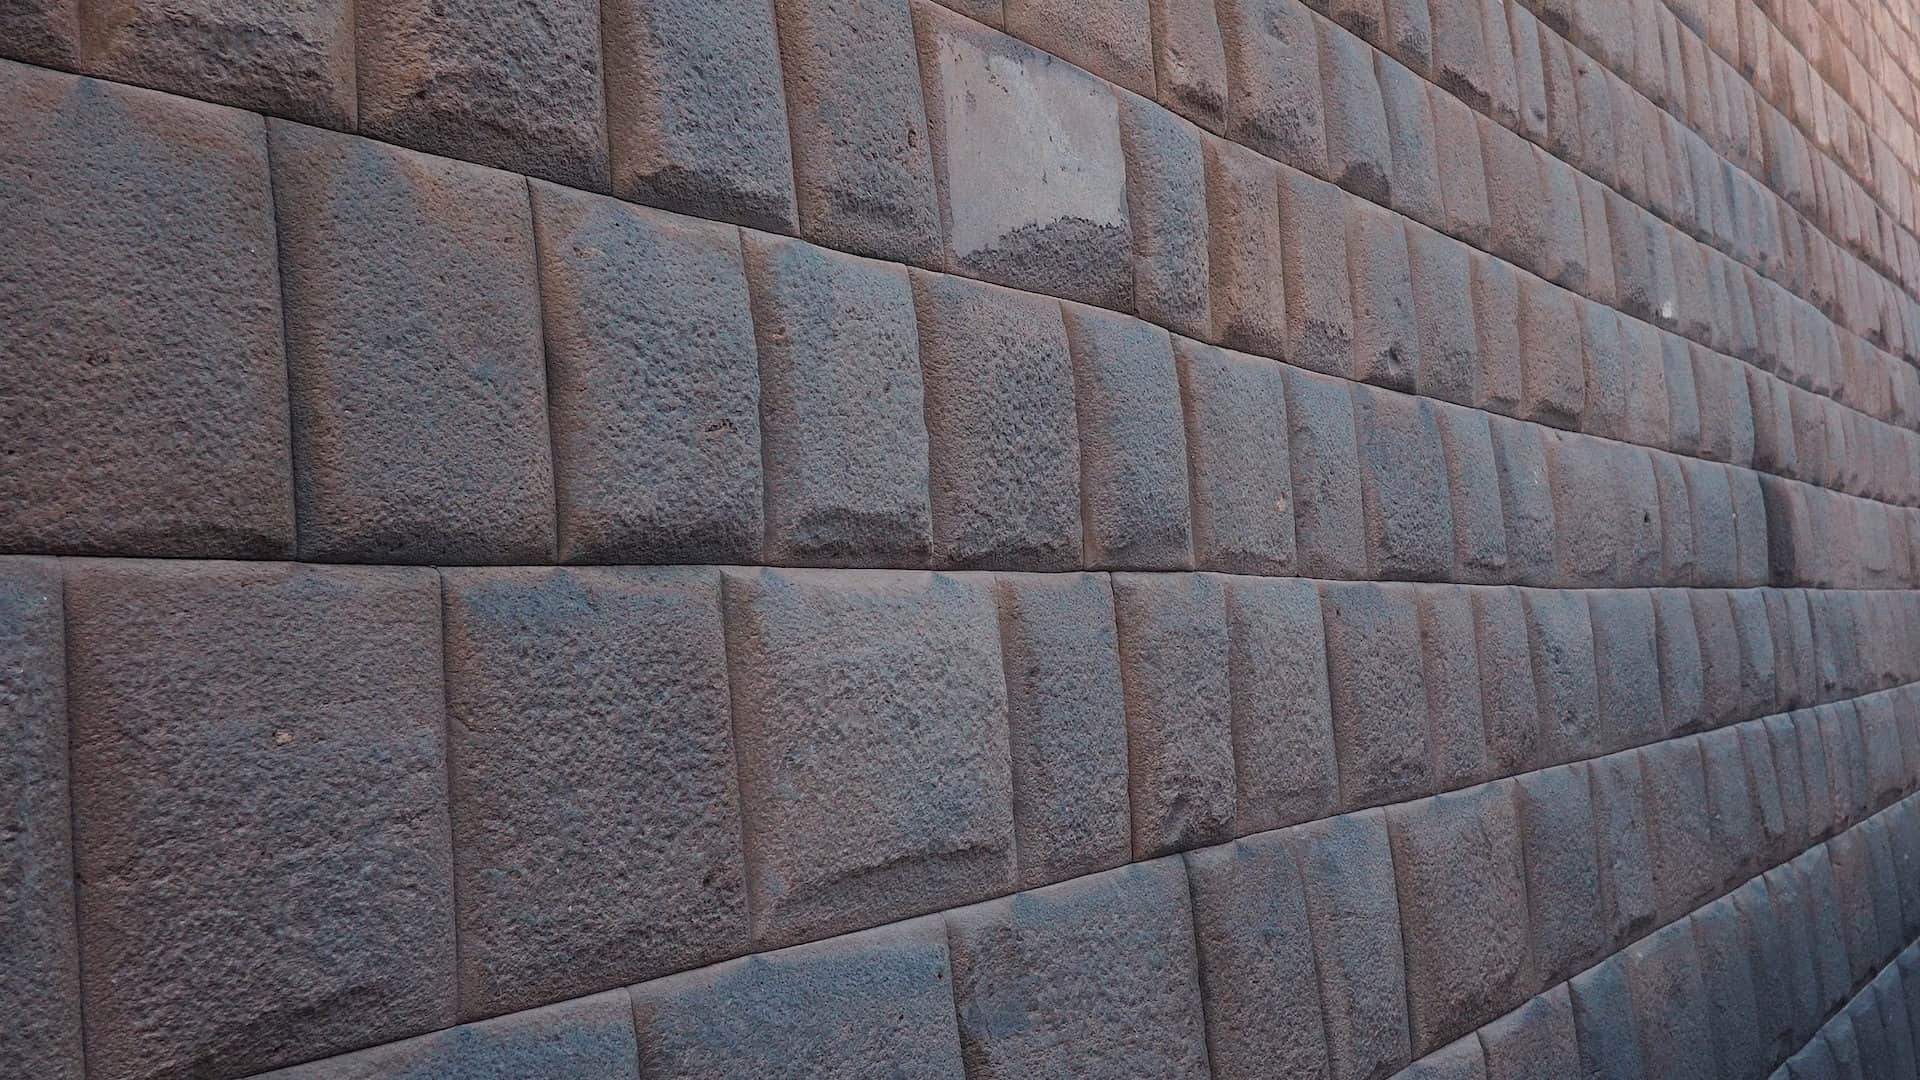 Large square stones in a wall